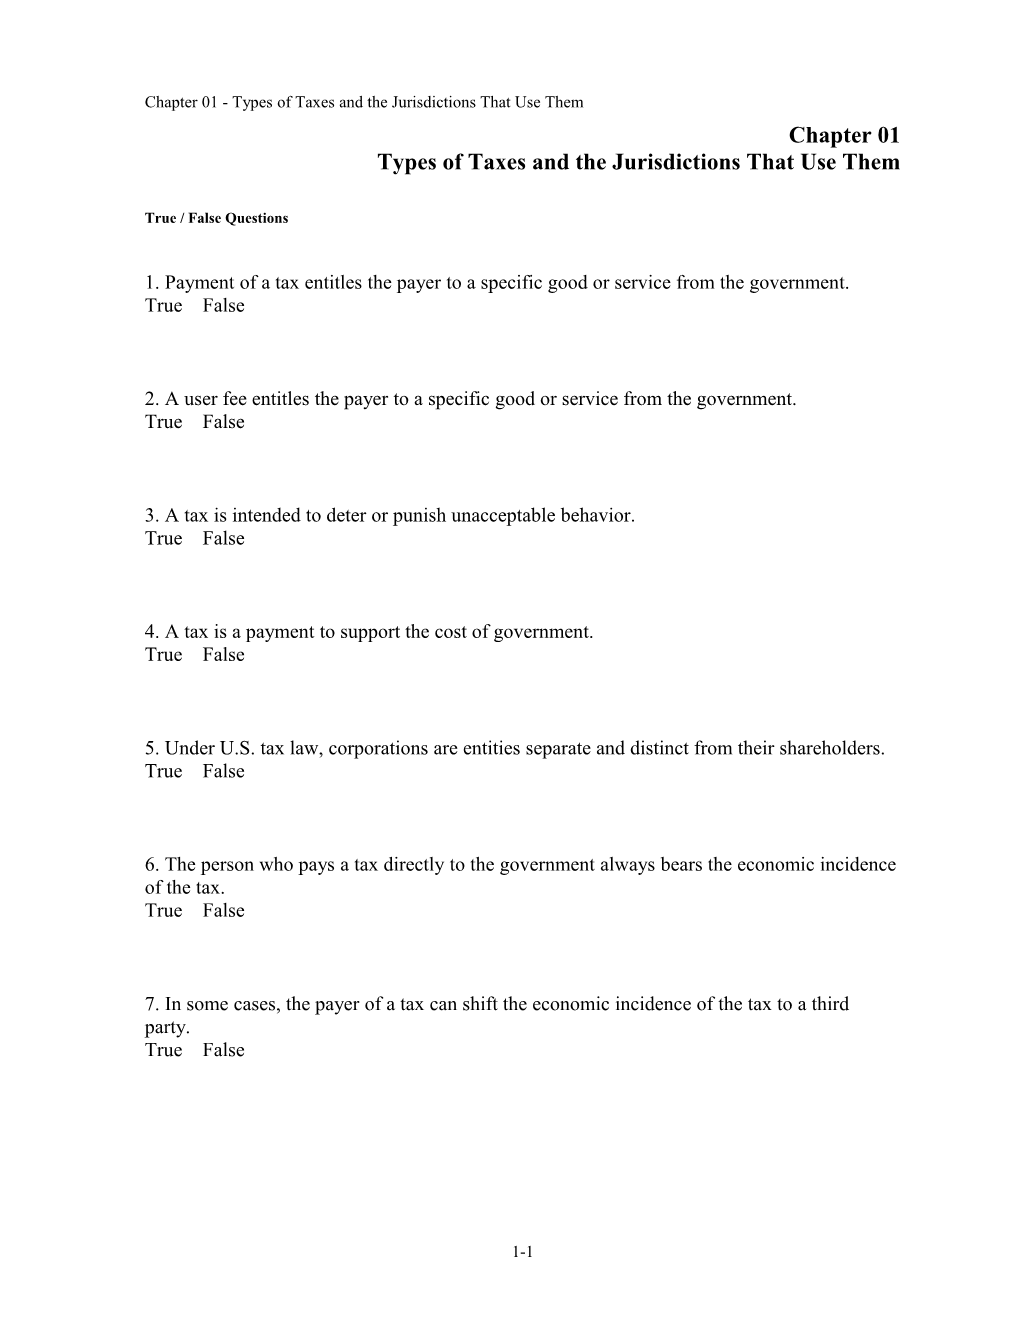 Chapter 01 Types of Taxes and the Jurisdictions That Use Them